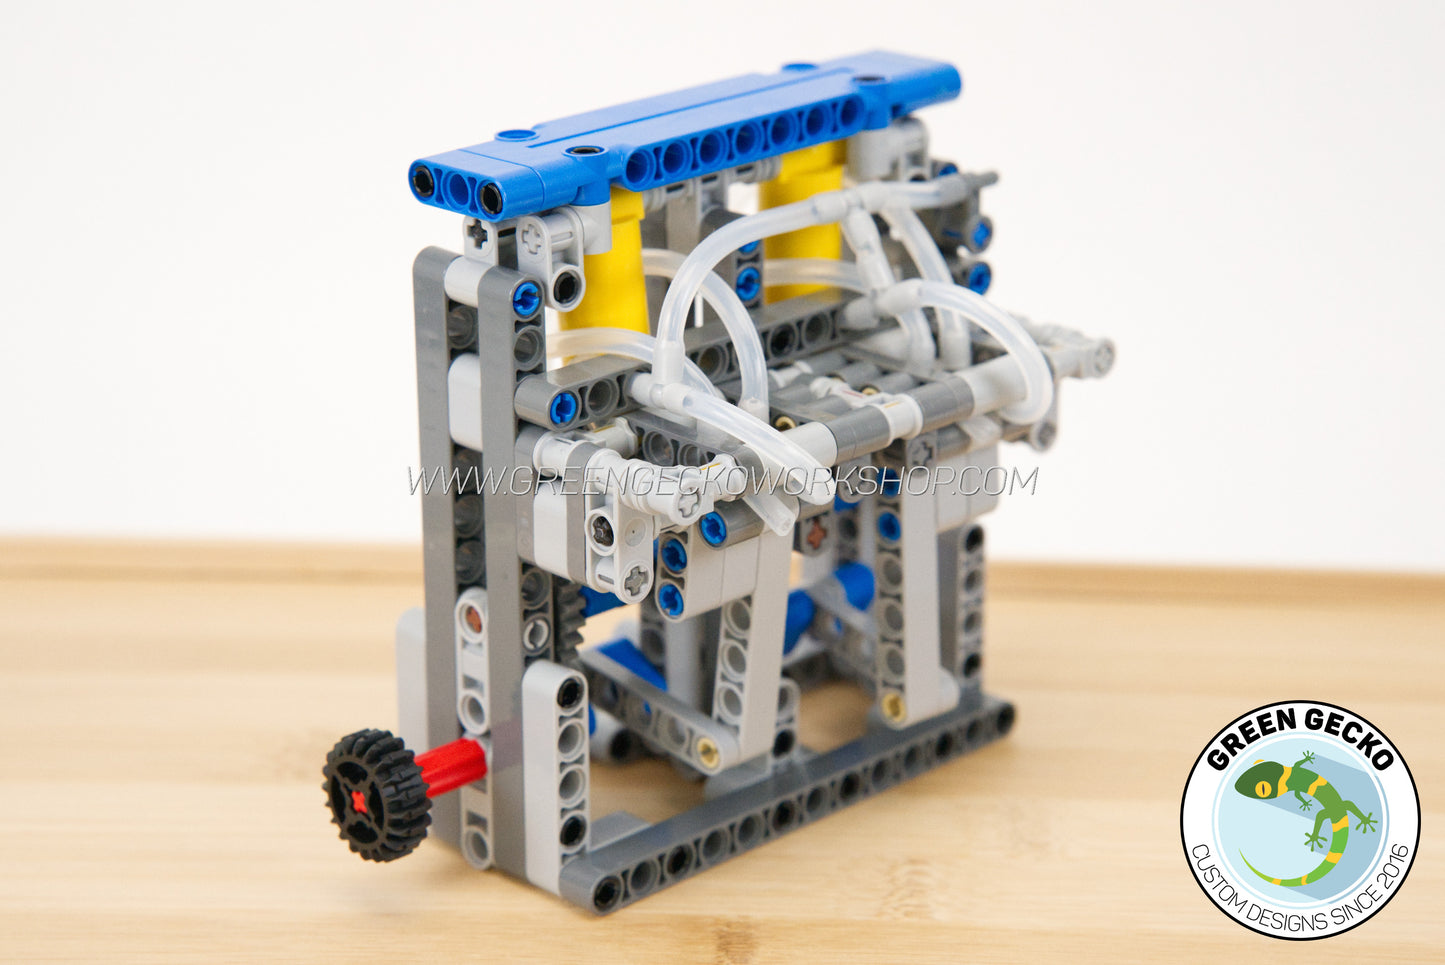 Complete Kit - Straight Twin Lego Pneumatic Engine - Switchless 2500RPM - 20% OFF!